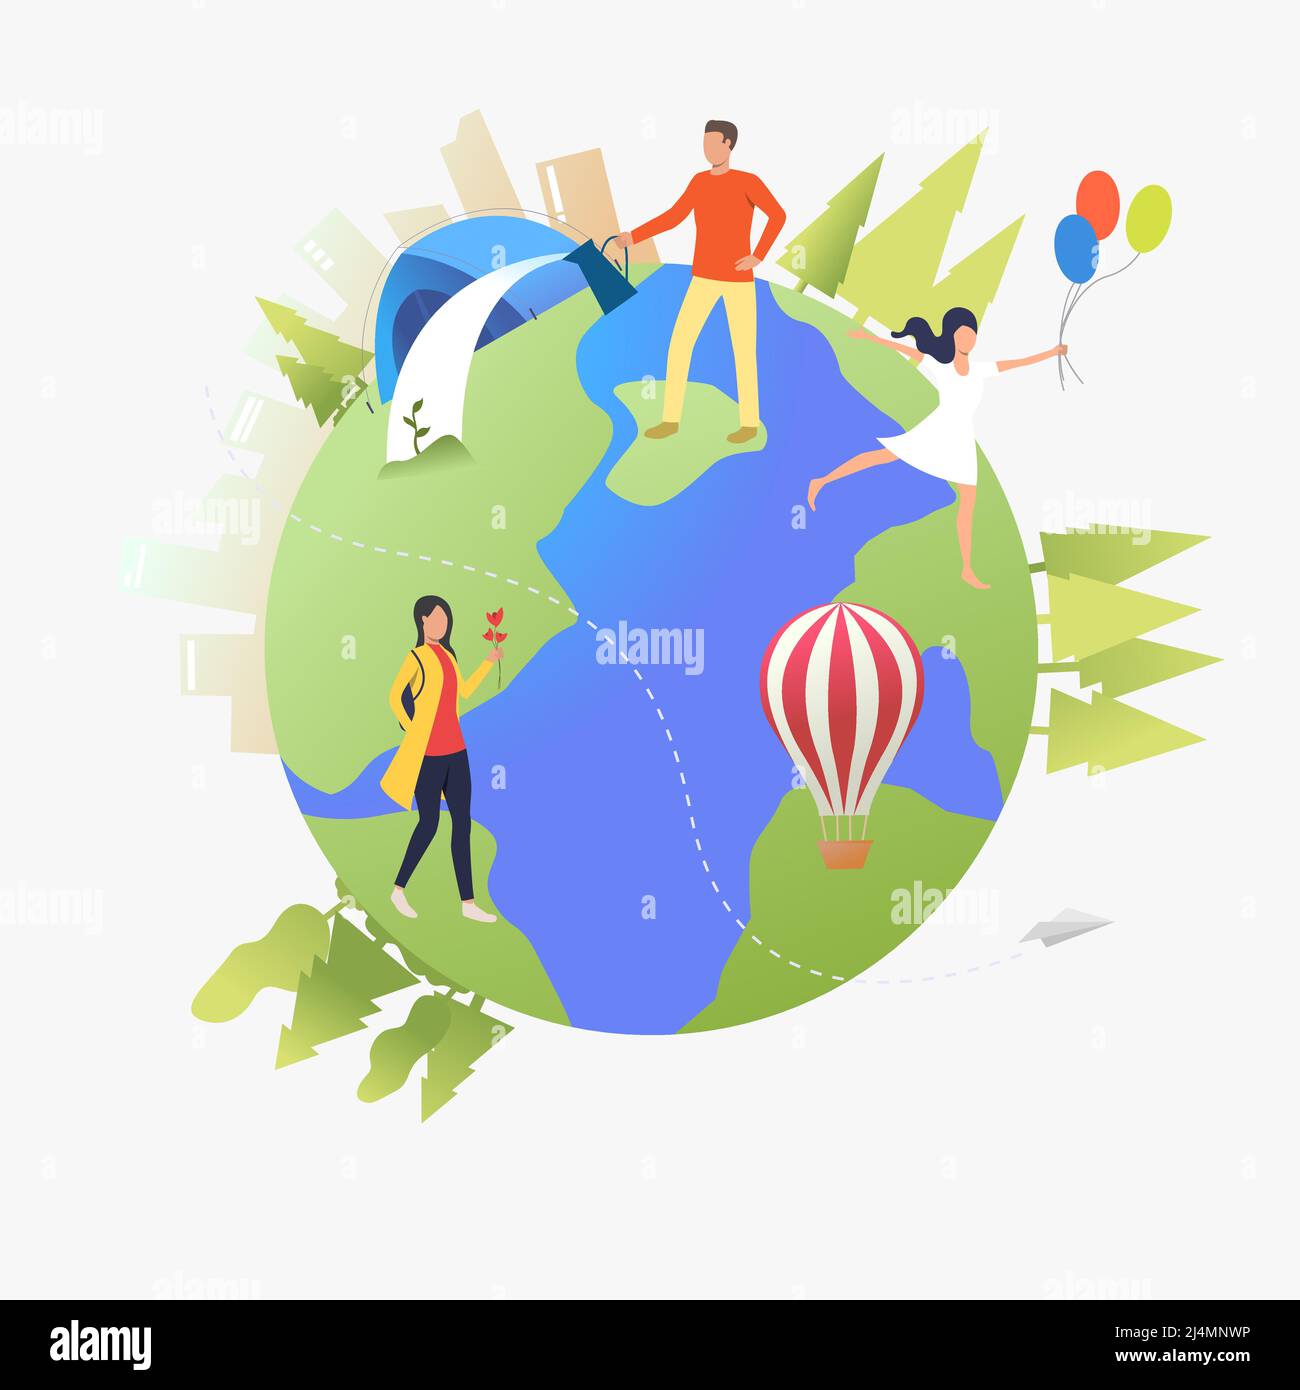 People walking, watering plants and camping on Earth globe. Lifestyle, leisure, activity concept. Vector illustration can be used for topics like vaca Stock Vector